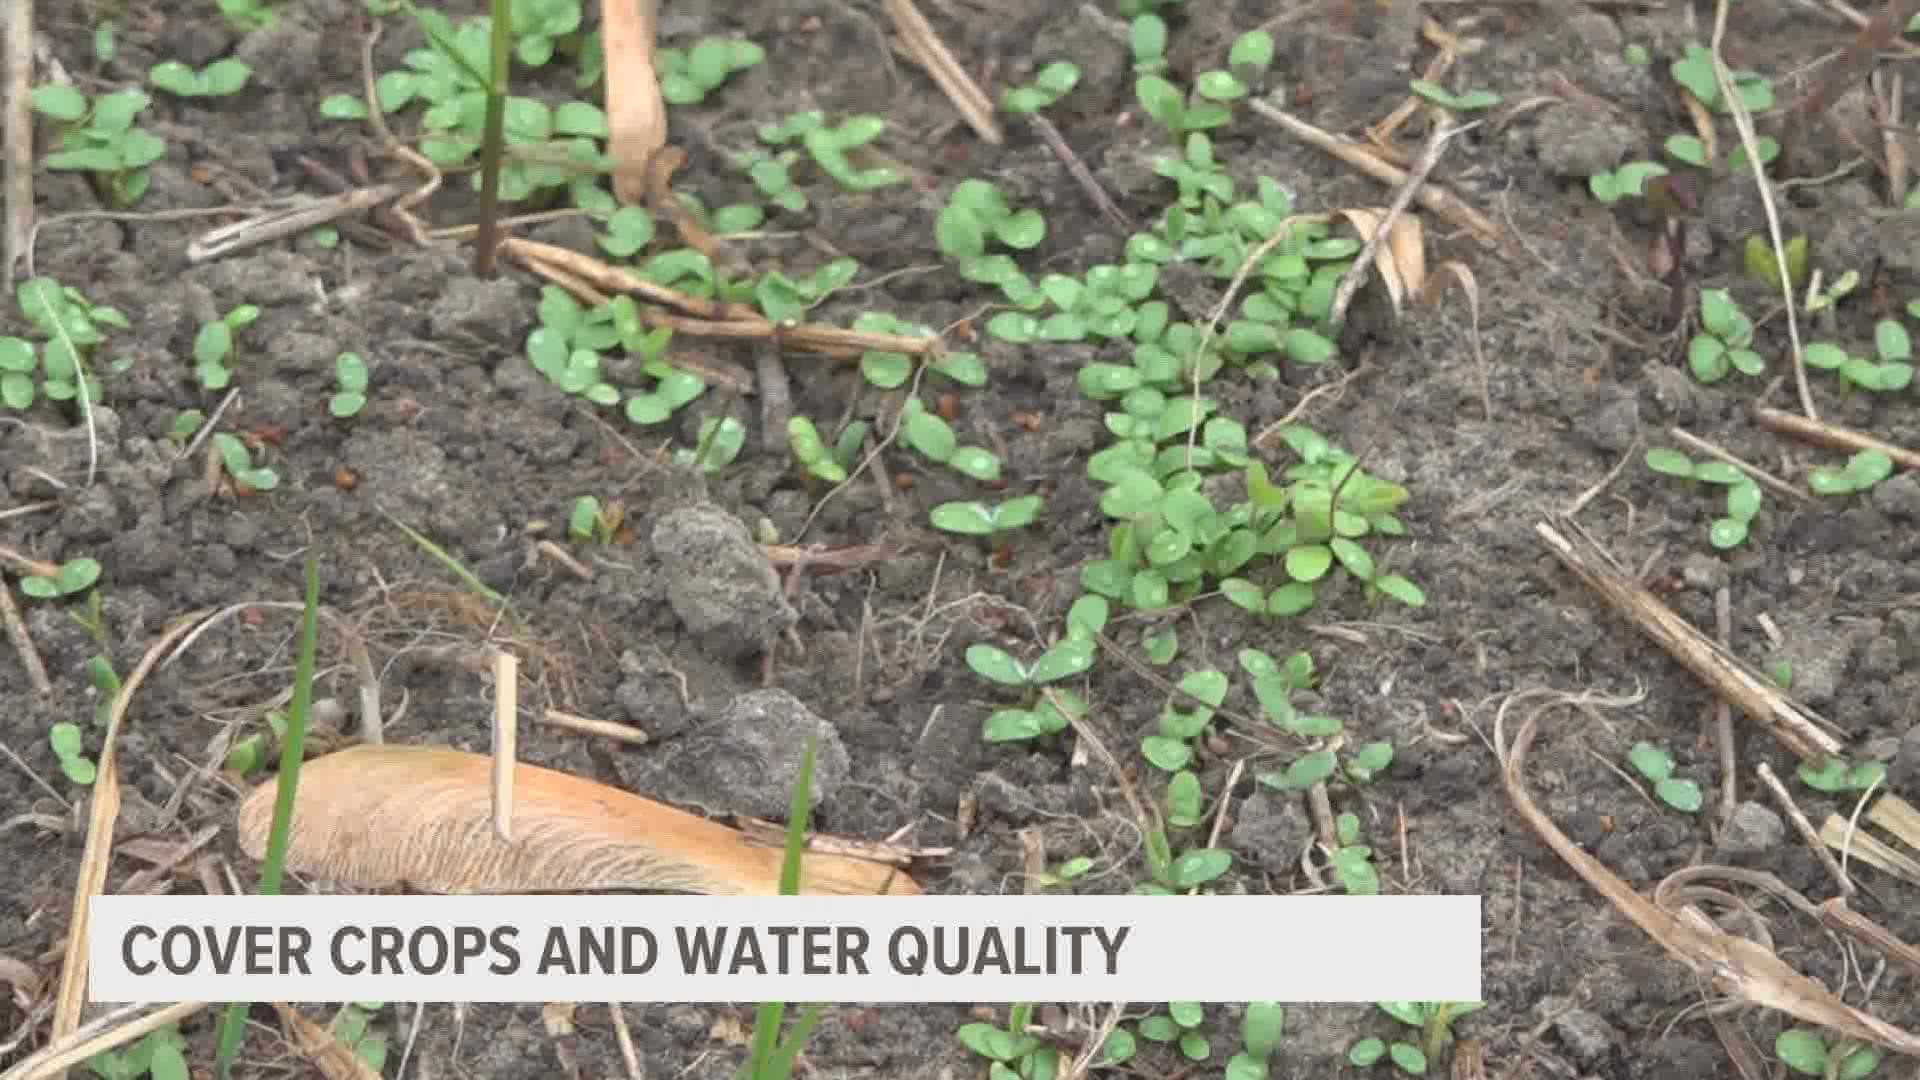 A farmer-owned cooperative and the Des Moines Water Works are coming together for education on the benefit of cover crops, and how water quality can be enhanced.